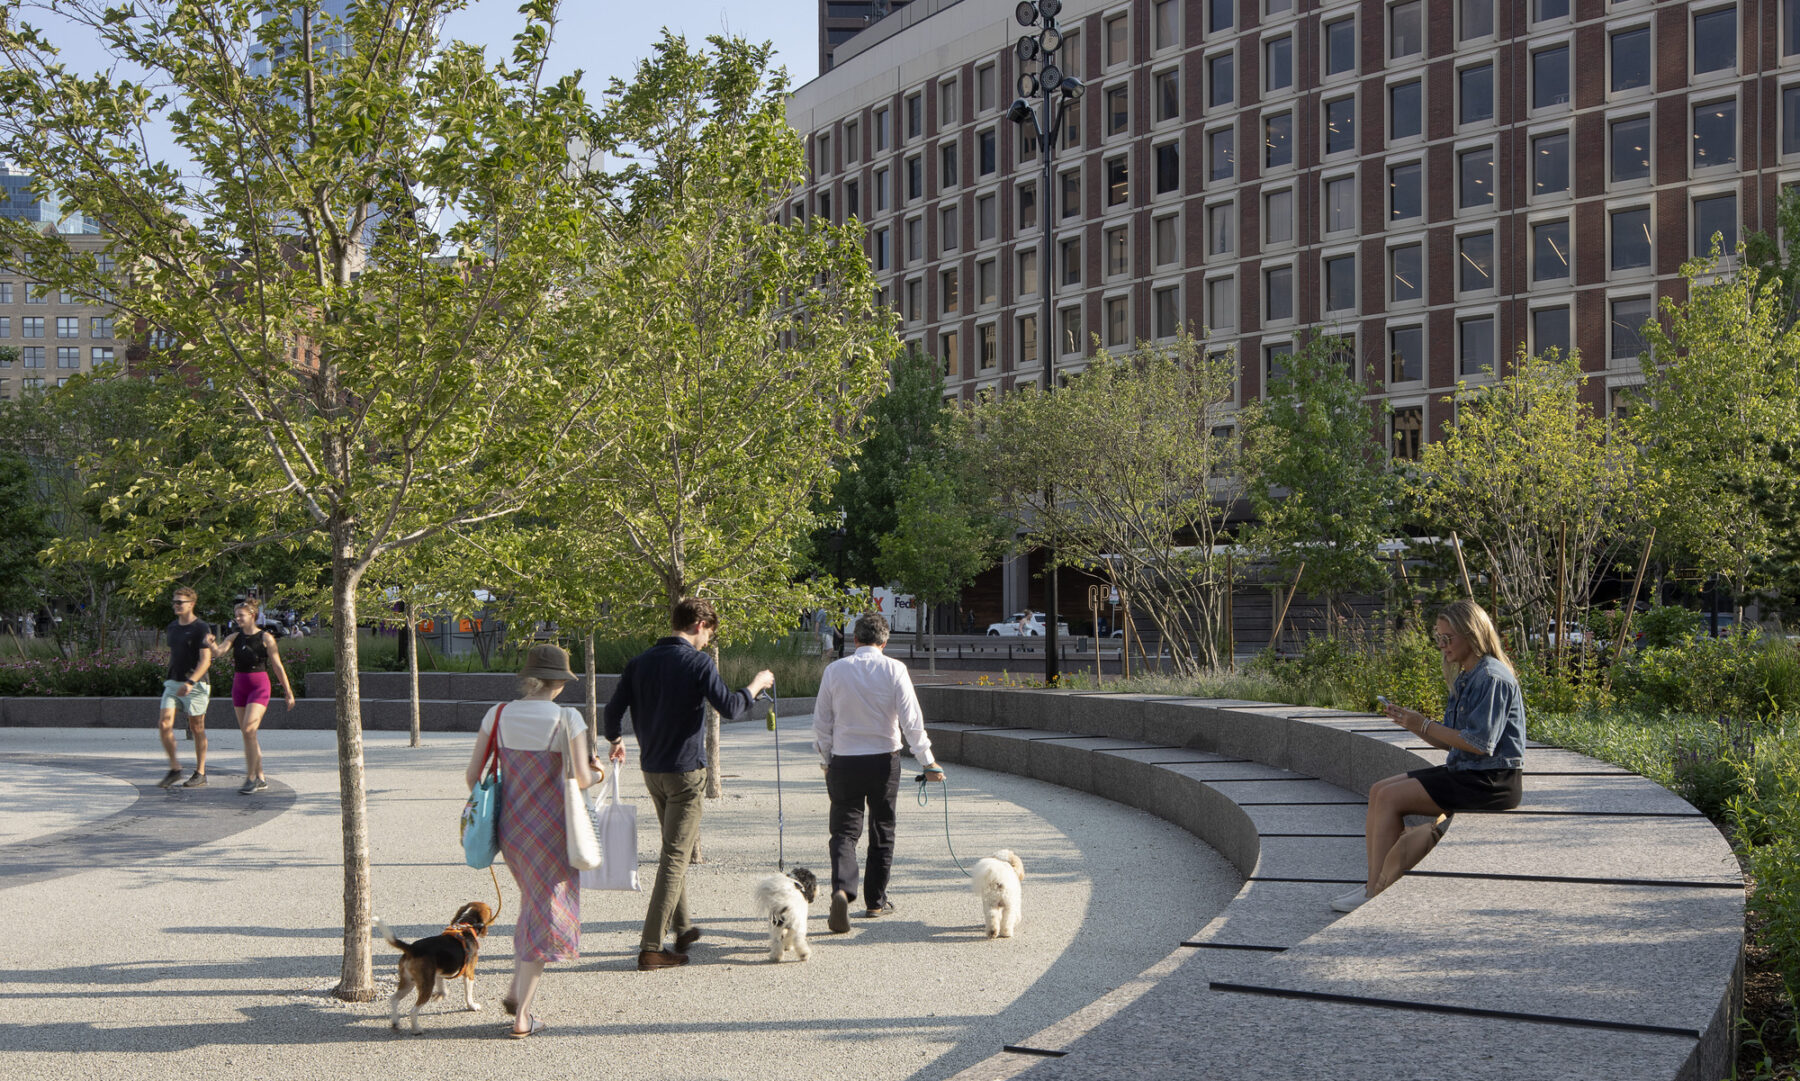 perspective photograph of pedestrians walking dogs in central plaza space